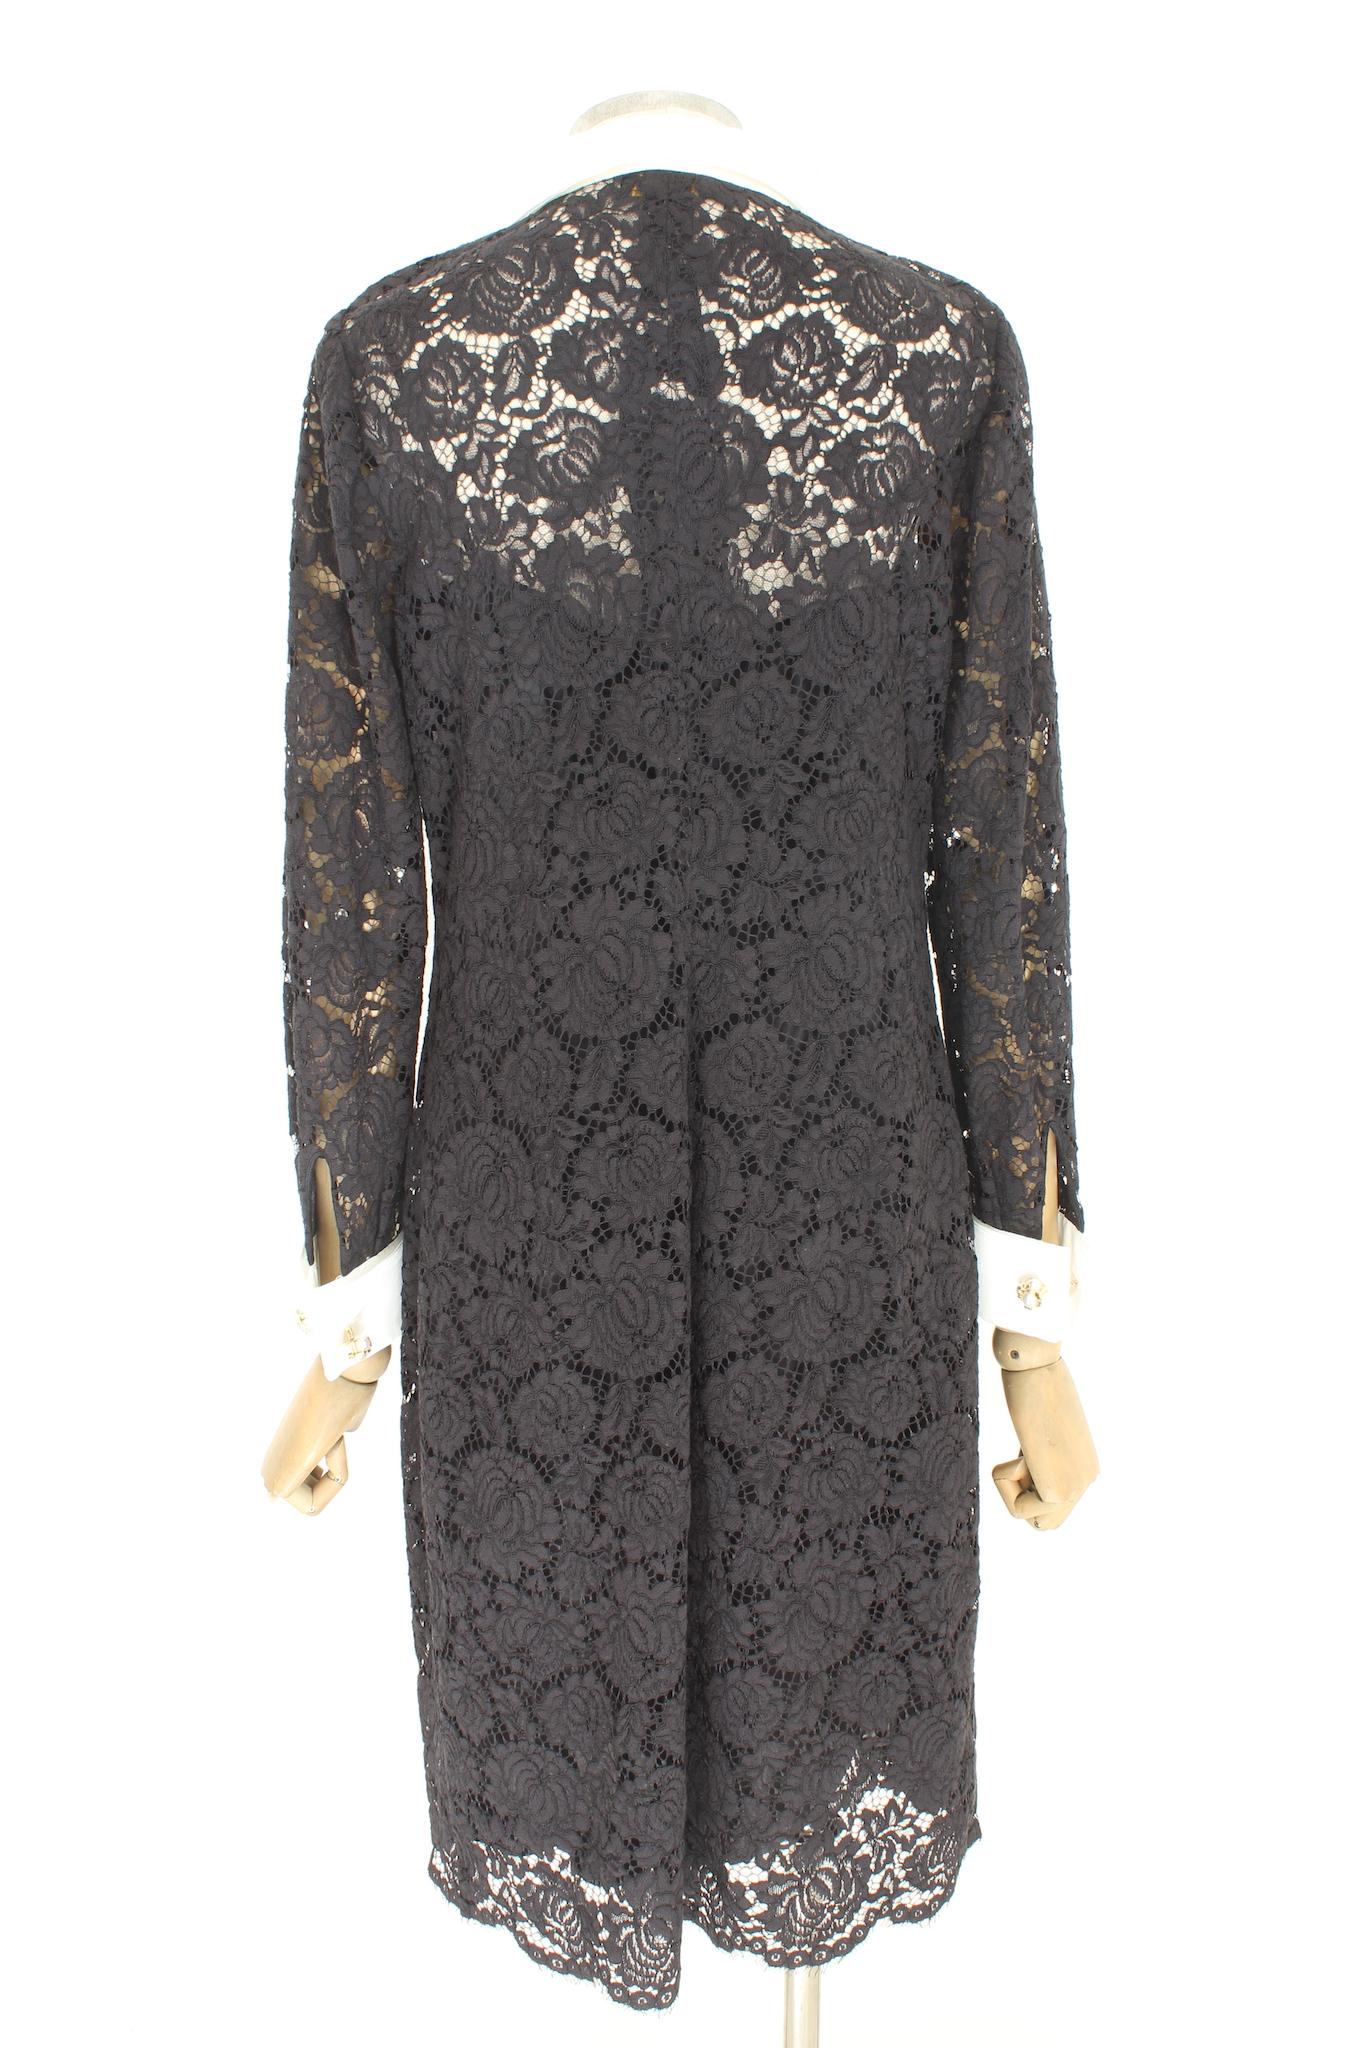 Luisa Spagnoli elegant dress 2000s. Lace evening dress with floral pattern, black color with white cuffs and collar. Closure with pearl jewel buttons. Cotton fabric, black slip inside. Made in italy.

Size: 46 It 12 Us 14 Uk

Shoulder: